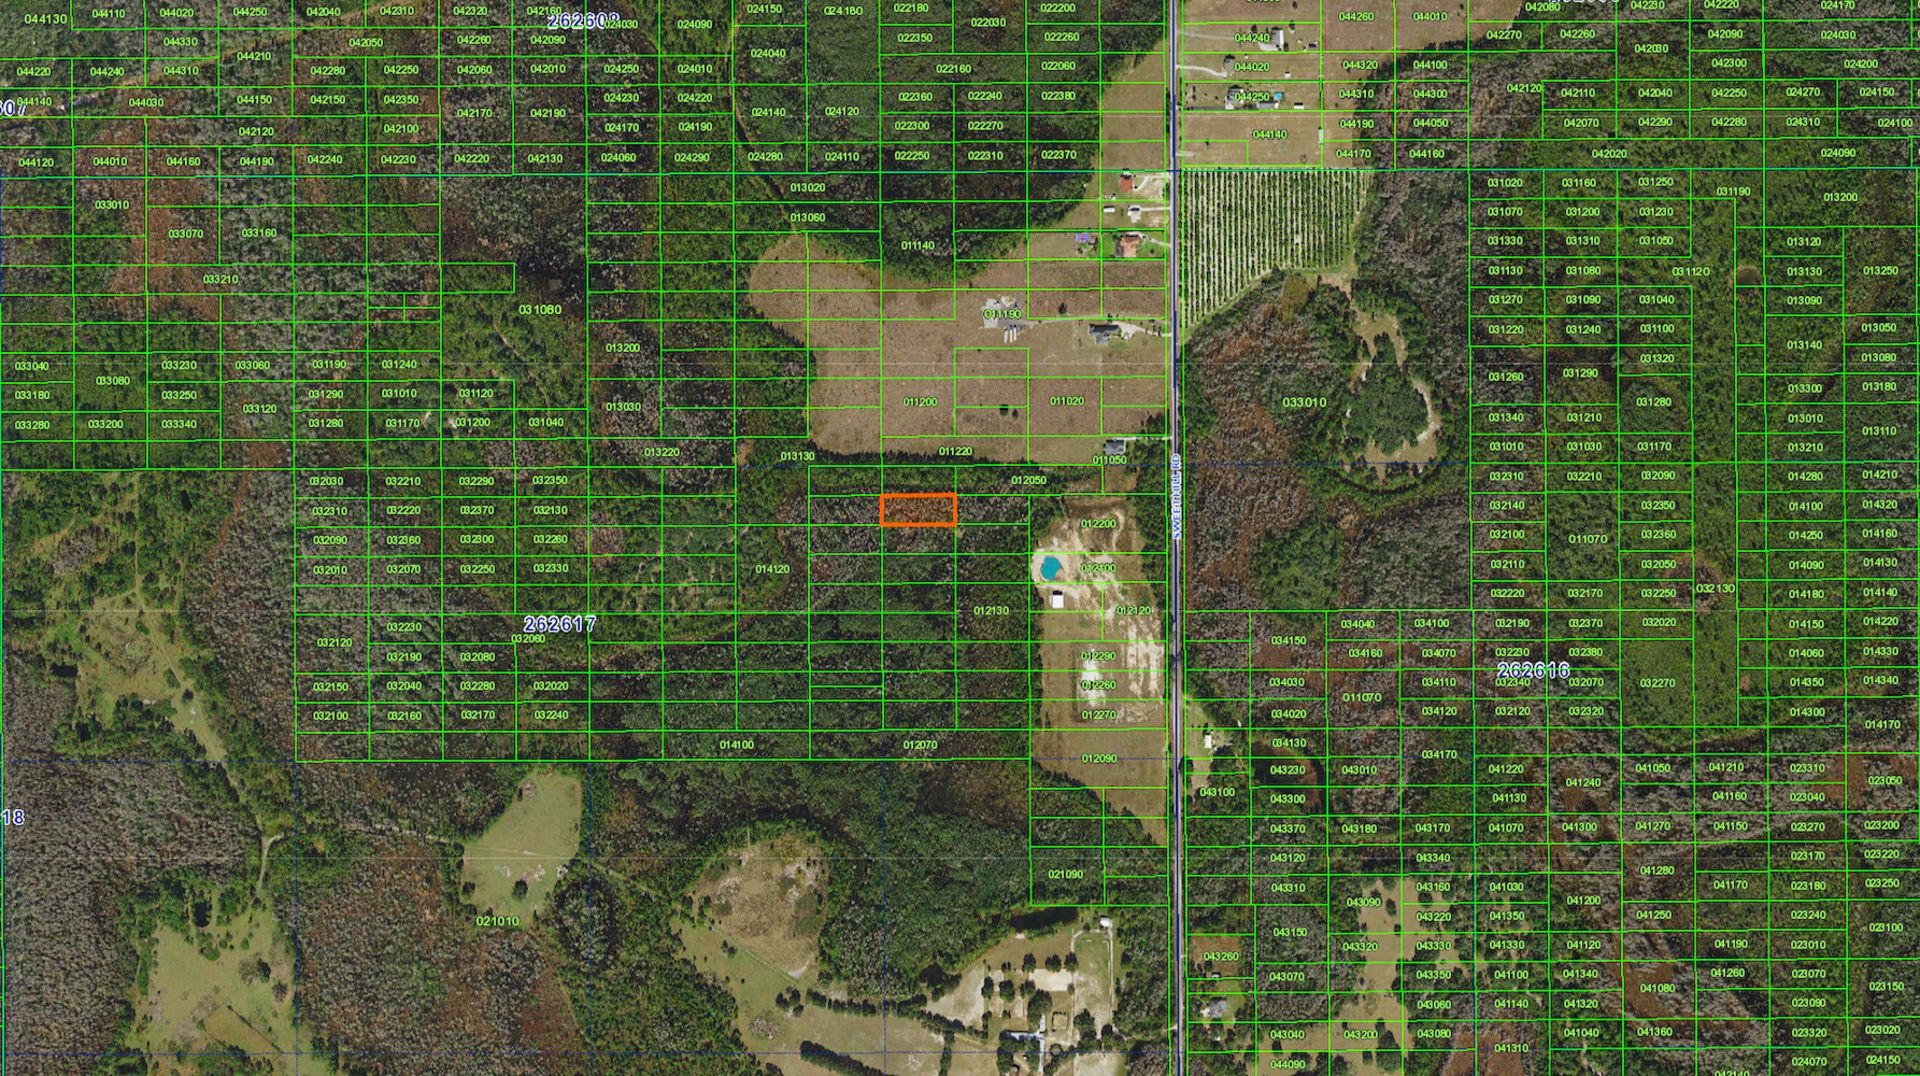 Diversify Your Real Estate Portfolio with this 1-Acre Lot in Sunny Polk County, Florida! - Image 7 of 12